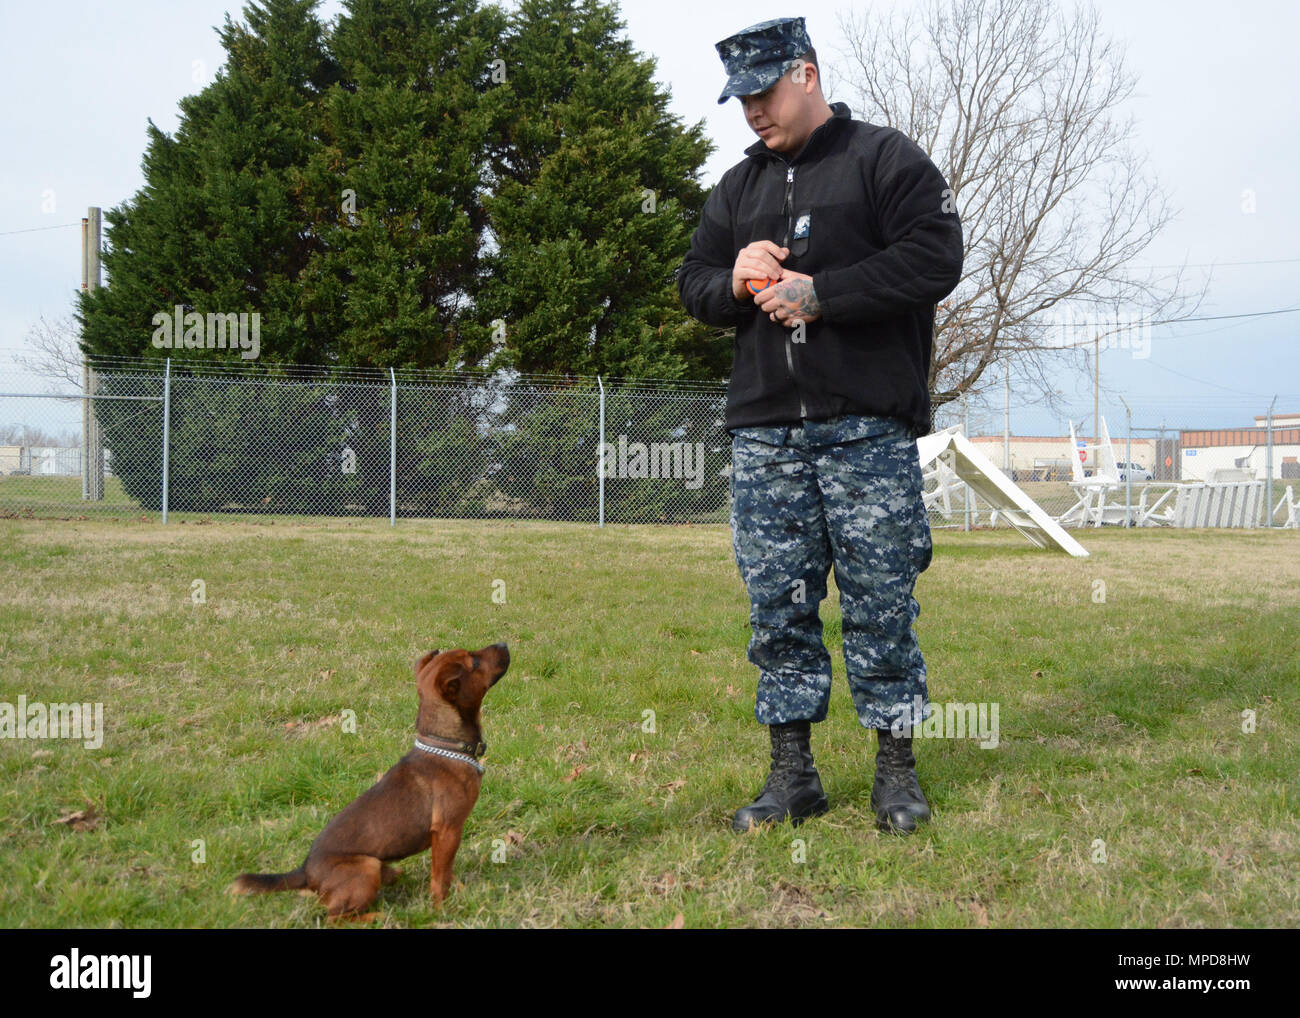 170201-N-OW828-002 NORFOLK (Feb. 1, 2017) - Master-At-Arms 2nd Class Jordyn Japec, Military Working Dog Handler and Puskos, a Jagdterrier MWD Drug Detector, begin the certification process Jan. 26 to include obedience training and narcotic detector training at Naval Station Norfolk.  (U.S. Navy photo by Mass Communication Specialist 3rd Class Jeanyra A. Mateo/Released) Stock Photo